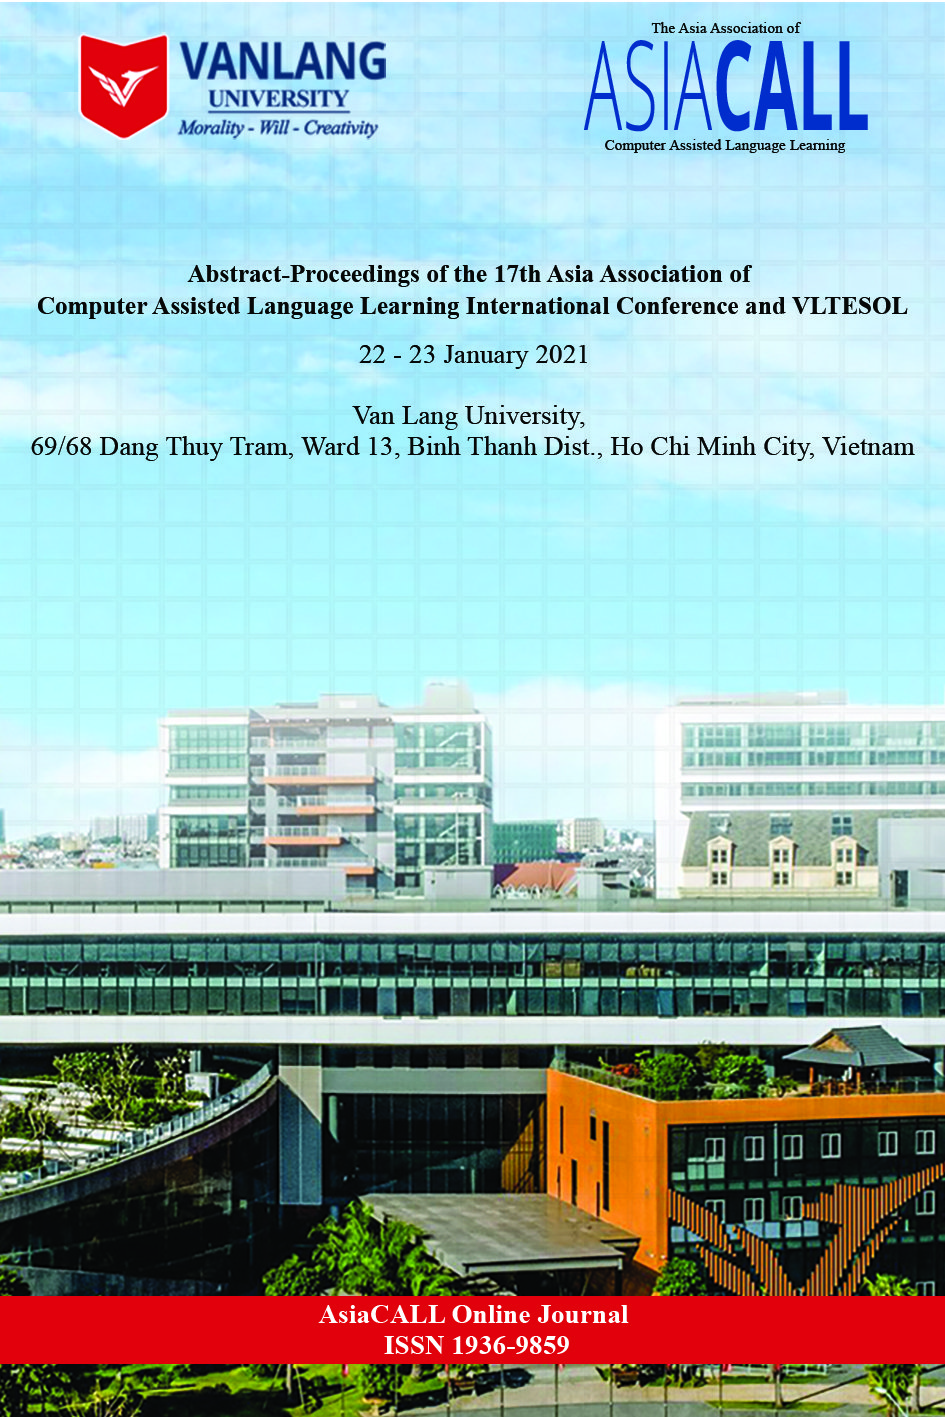                     View Vol. 12 No. 1 (2021): Abstracts of the 17th AsiaCALL International Conference & VLTESOL
                